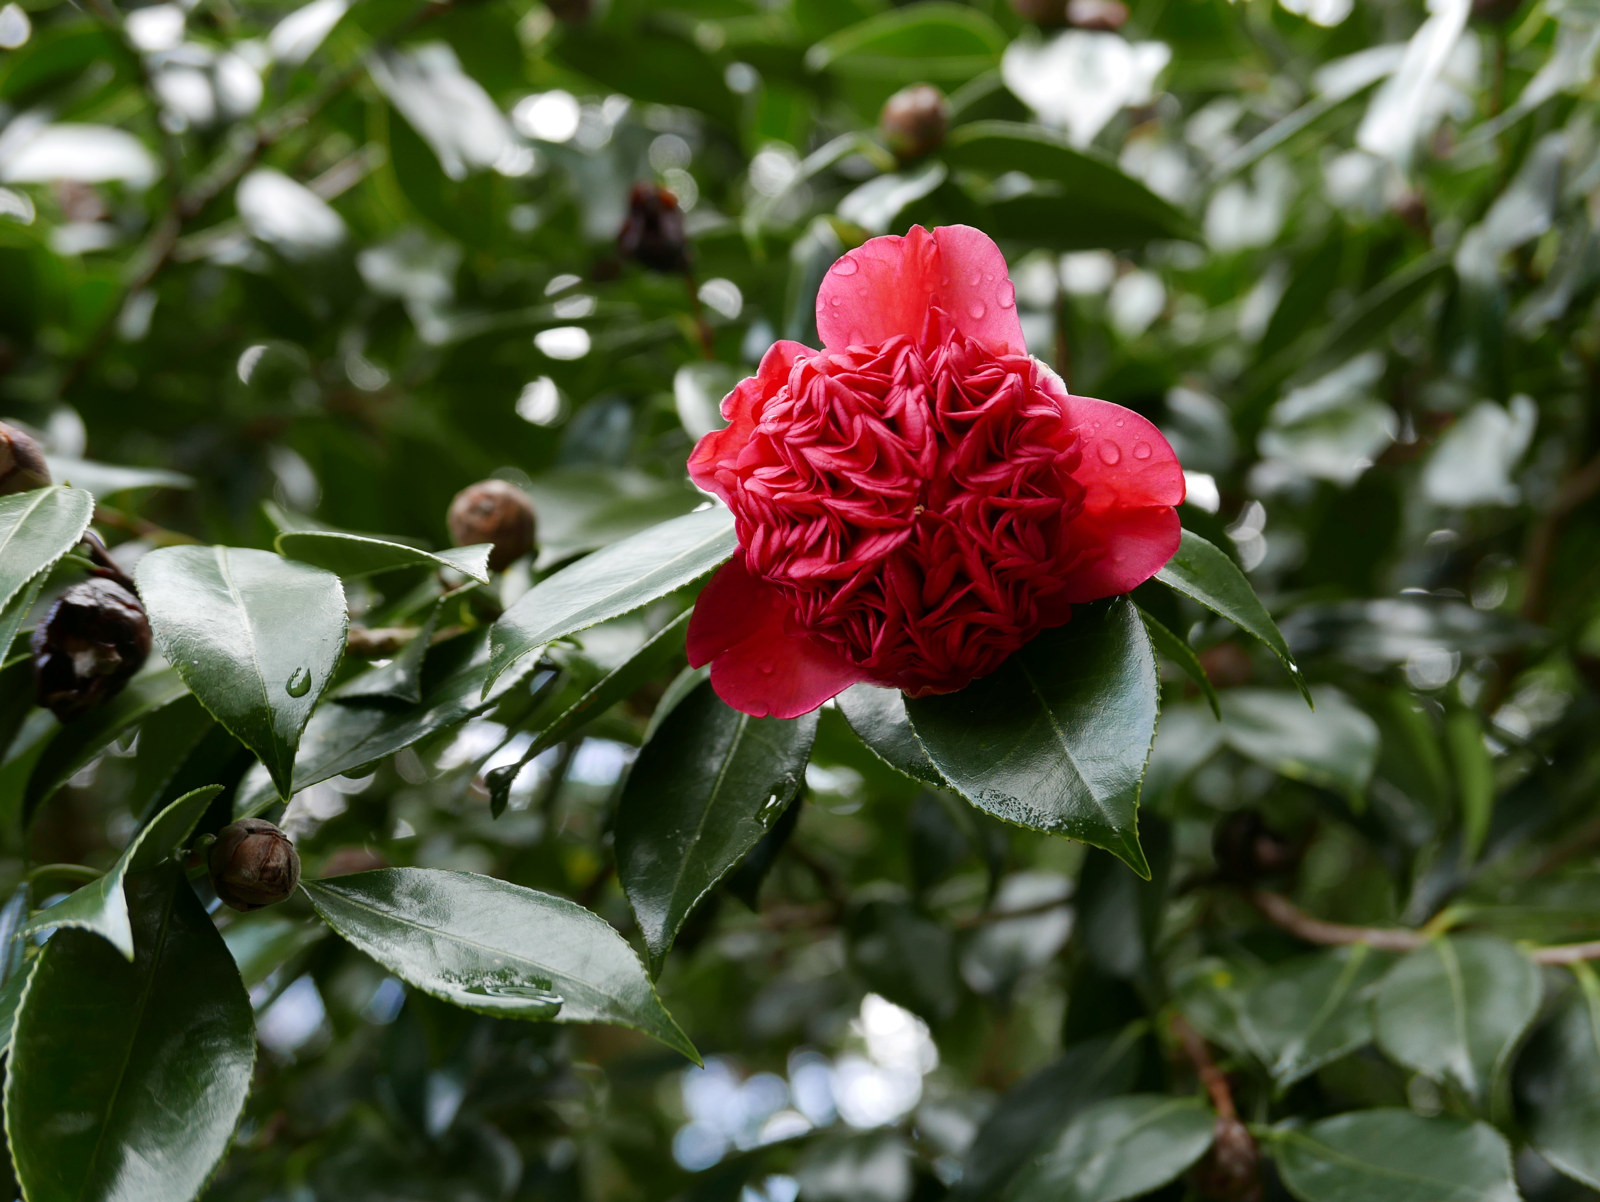 The double bloom of the waratah camellia at Vaucluse House